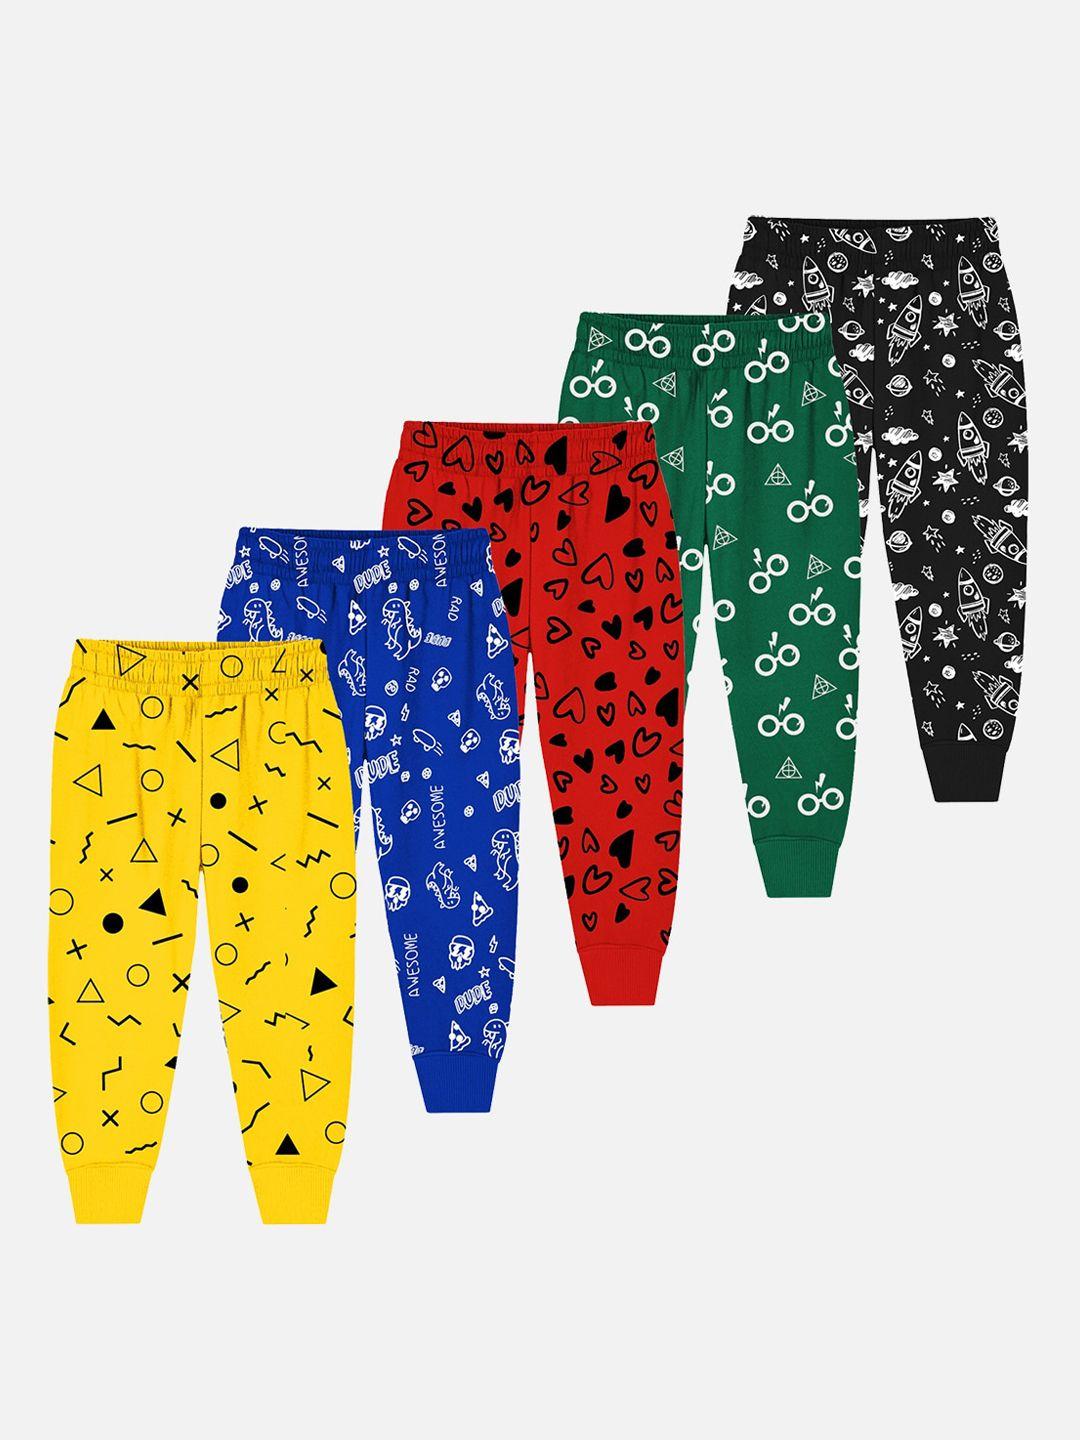 trampoline kids pack of 5  graphic printed cotton joggers